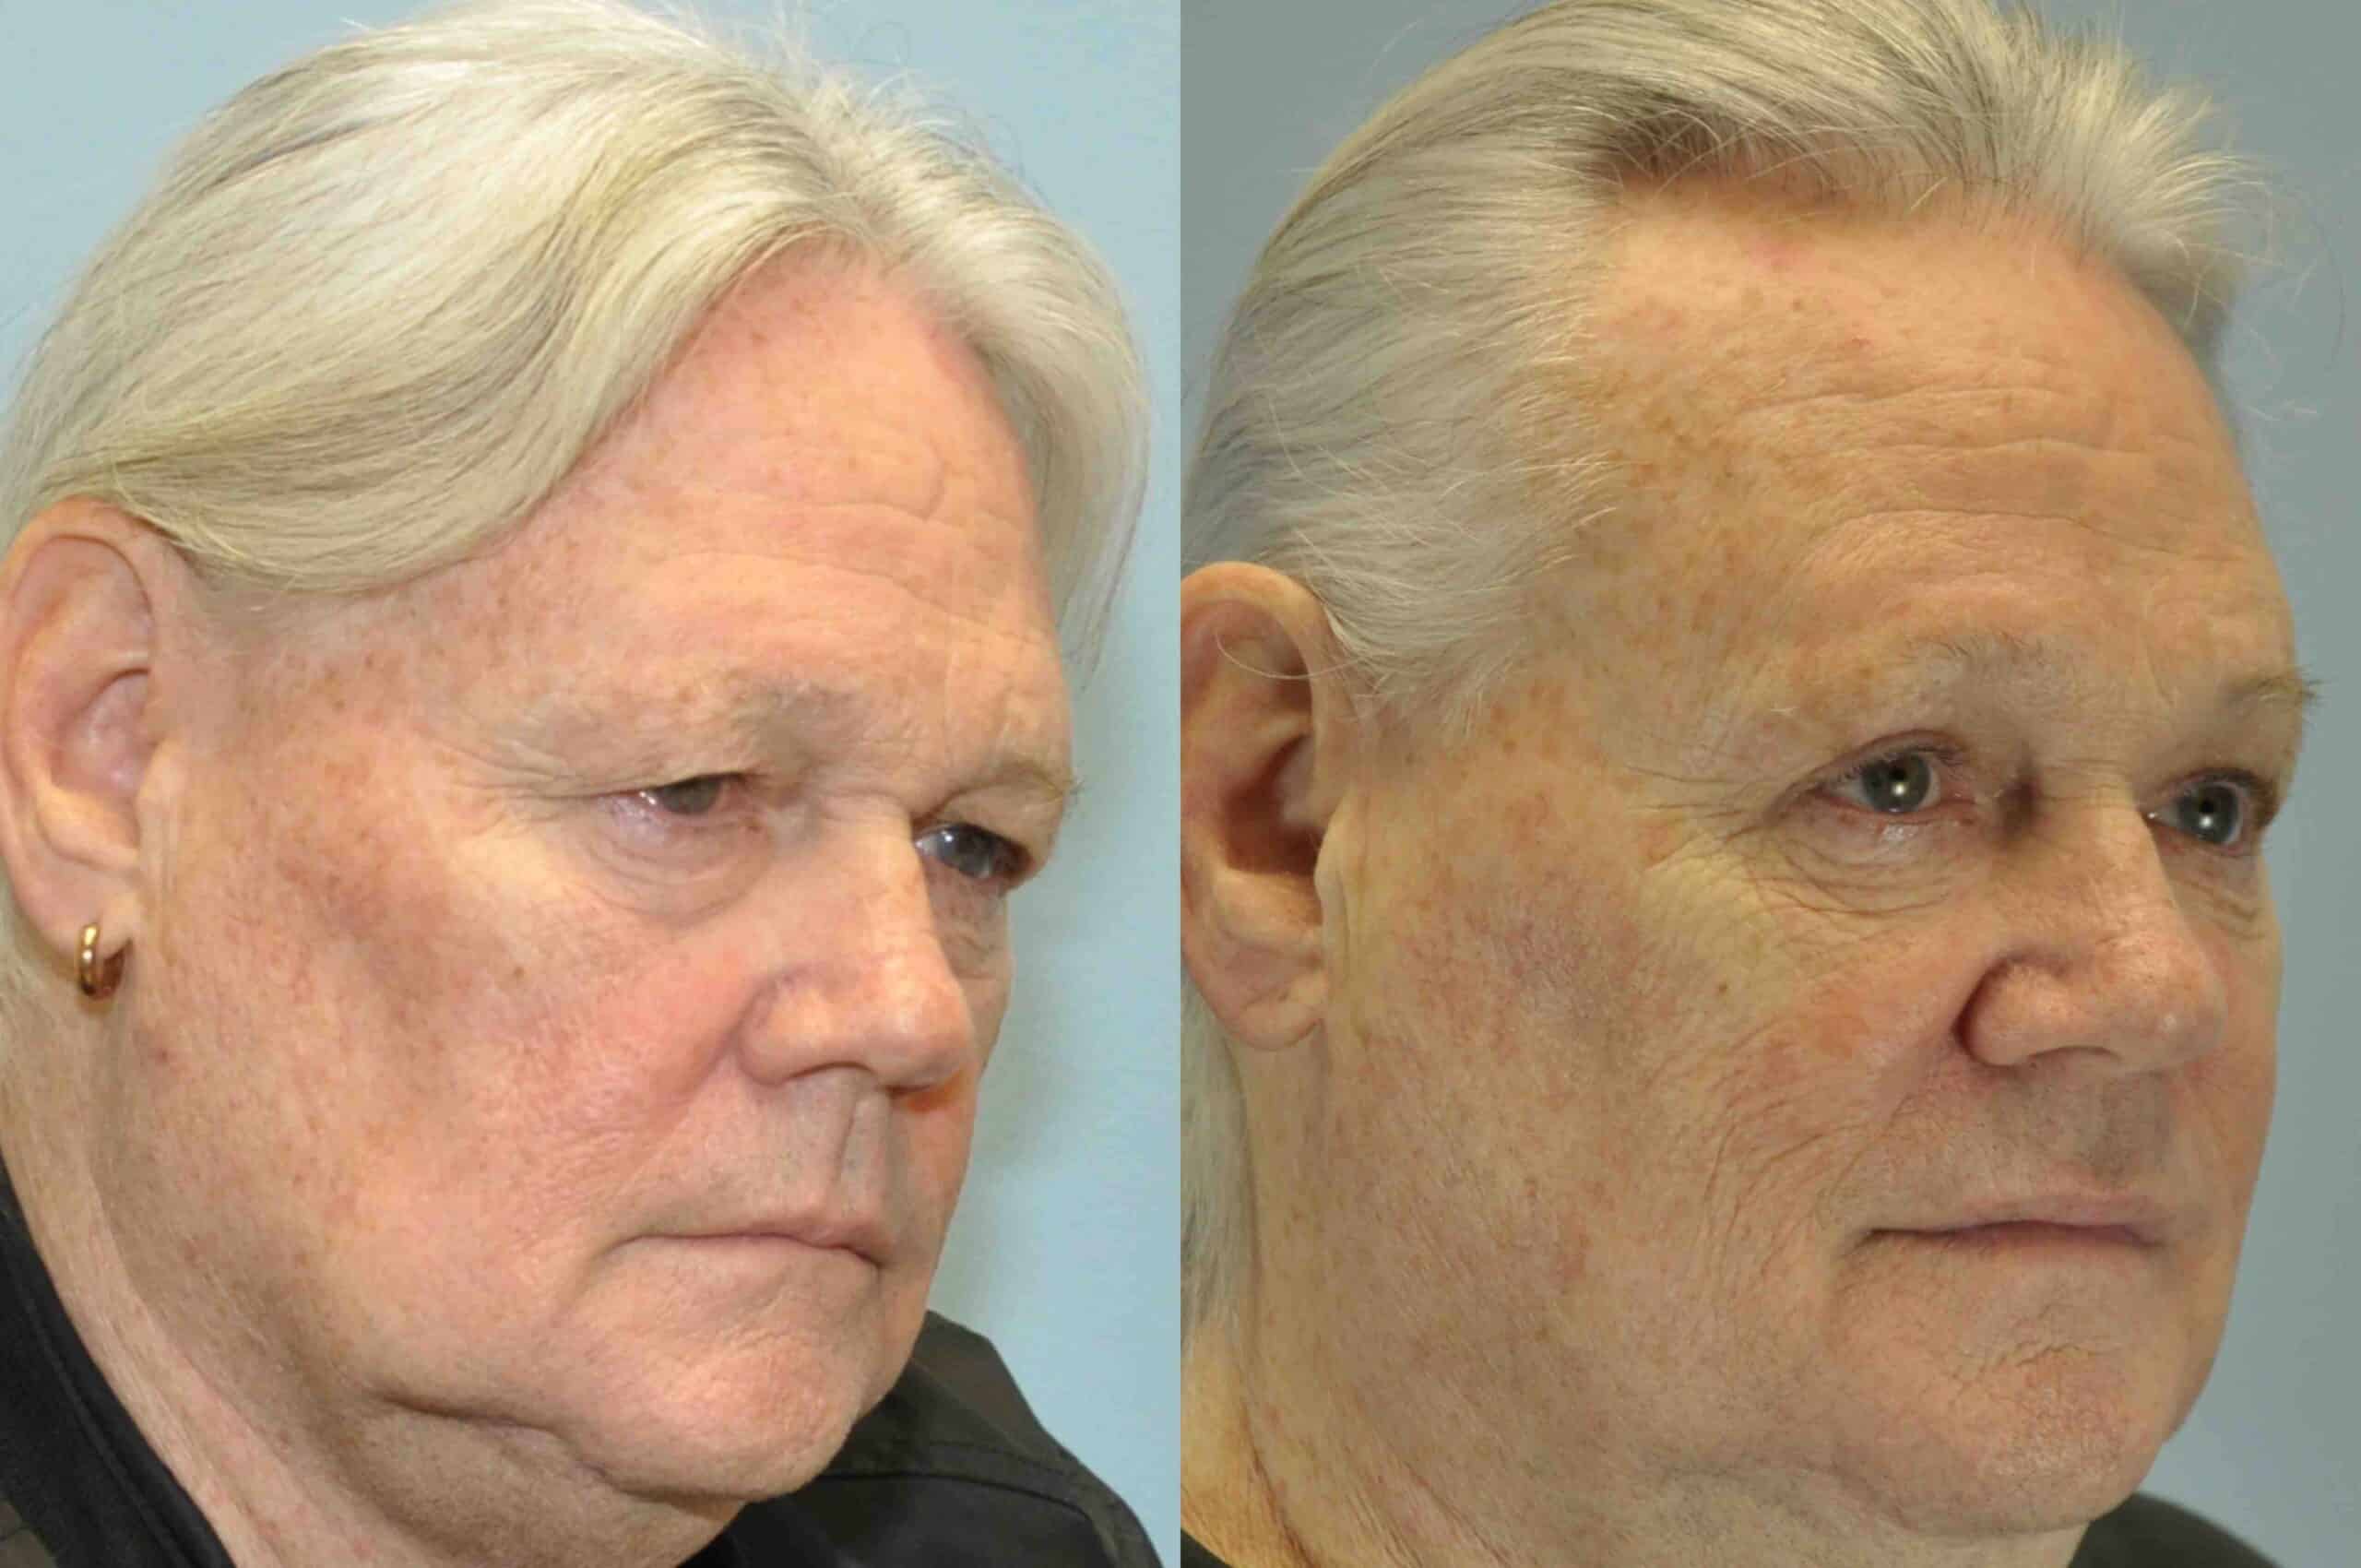 Before and after, 5 mo post op from upper blepharoplasty performed by Dr. Paul Vanek (diagonal view)